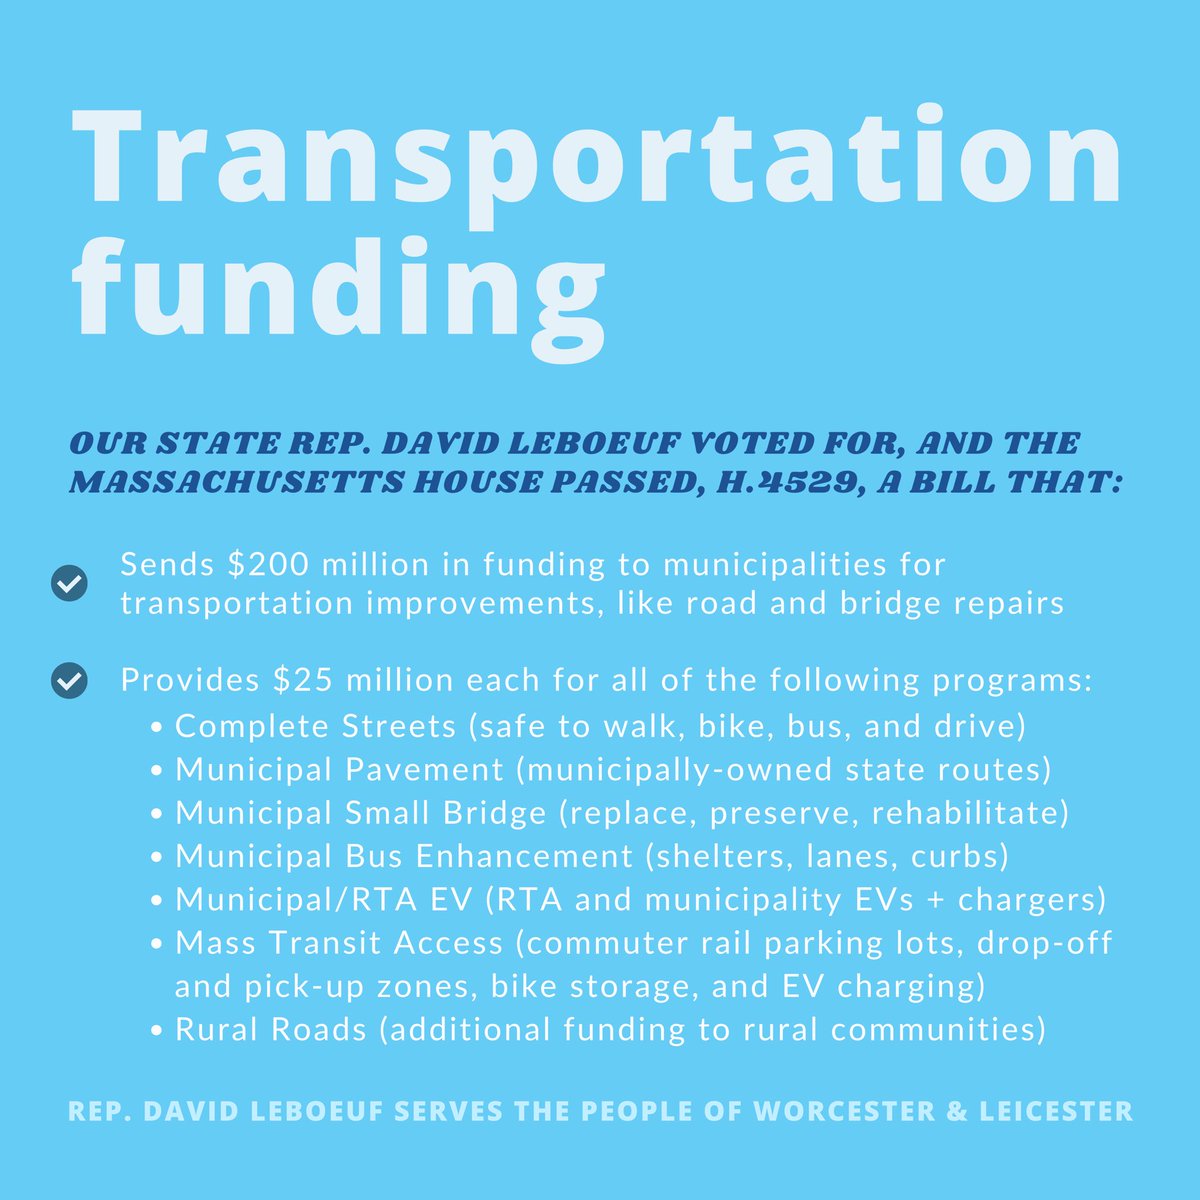 The House approved $200 million for municipal road improvements that include $25 million each for: 🚴🏼‍♀️Complete Streets 🛣️ Paving improvements 🚧 Small bridge repairs 🚌 Bus enhancements 🔋RTA EV infrastructure 🚉Commuter rail access 🚦Rural roads #MAPoli #MALeg